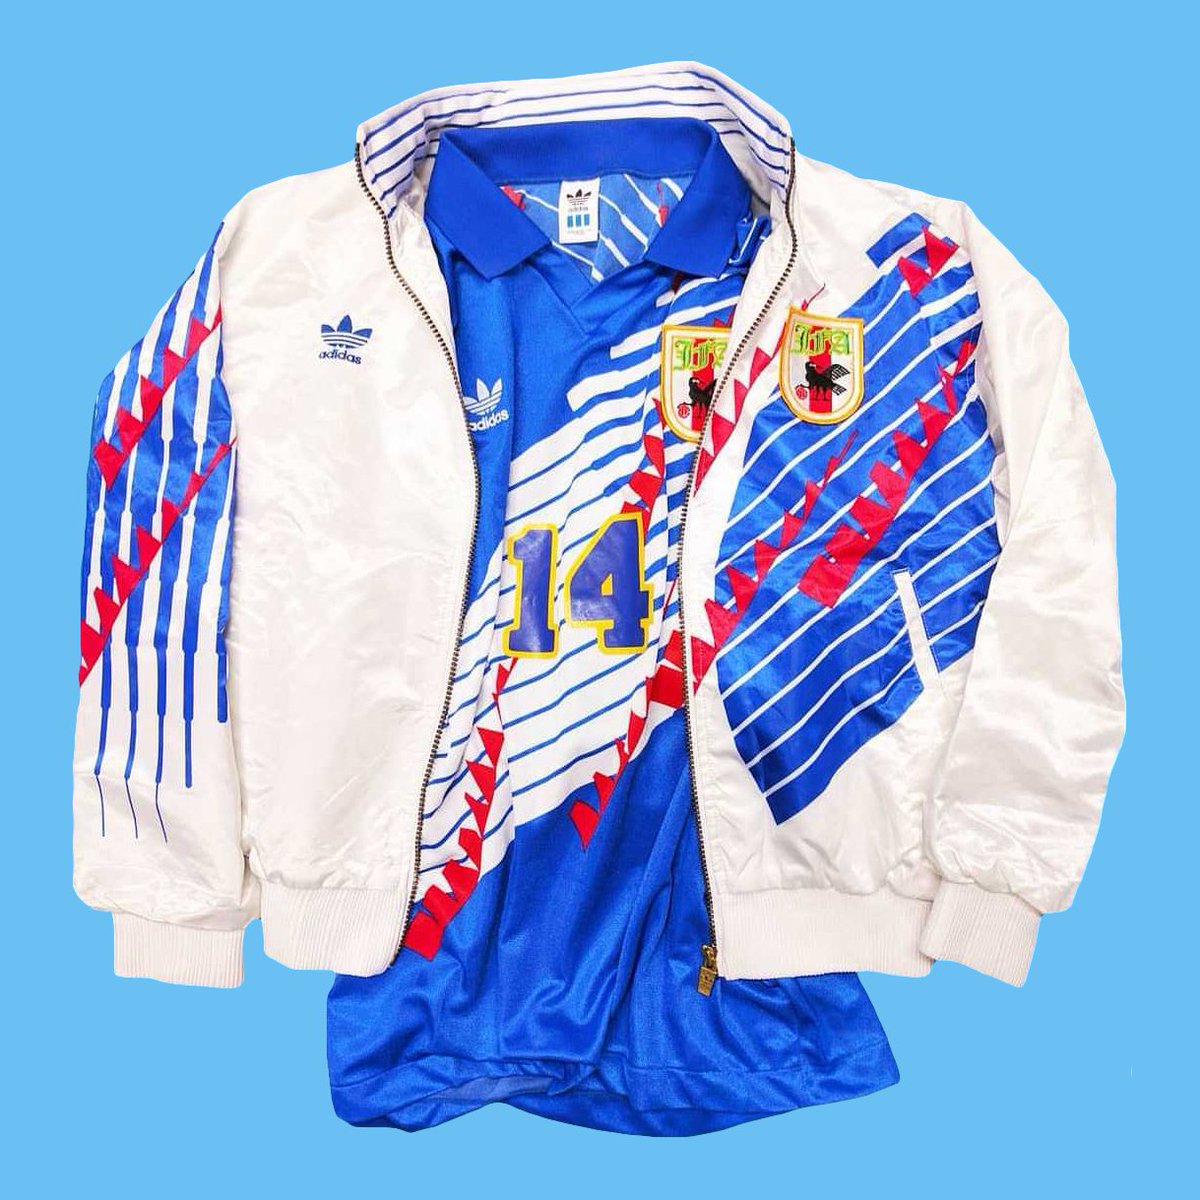 hogar Indígena labios Classic Football Shirts on Twitter: "Japattern Incredible Adidas jacket to  match the home shirt with the beautiful pattern that was worn by Japan from  92-96. The design actually belonged to the Japanese